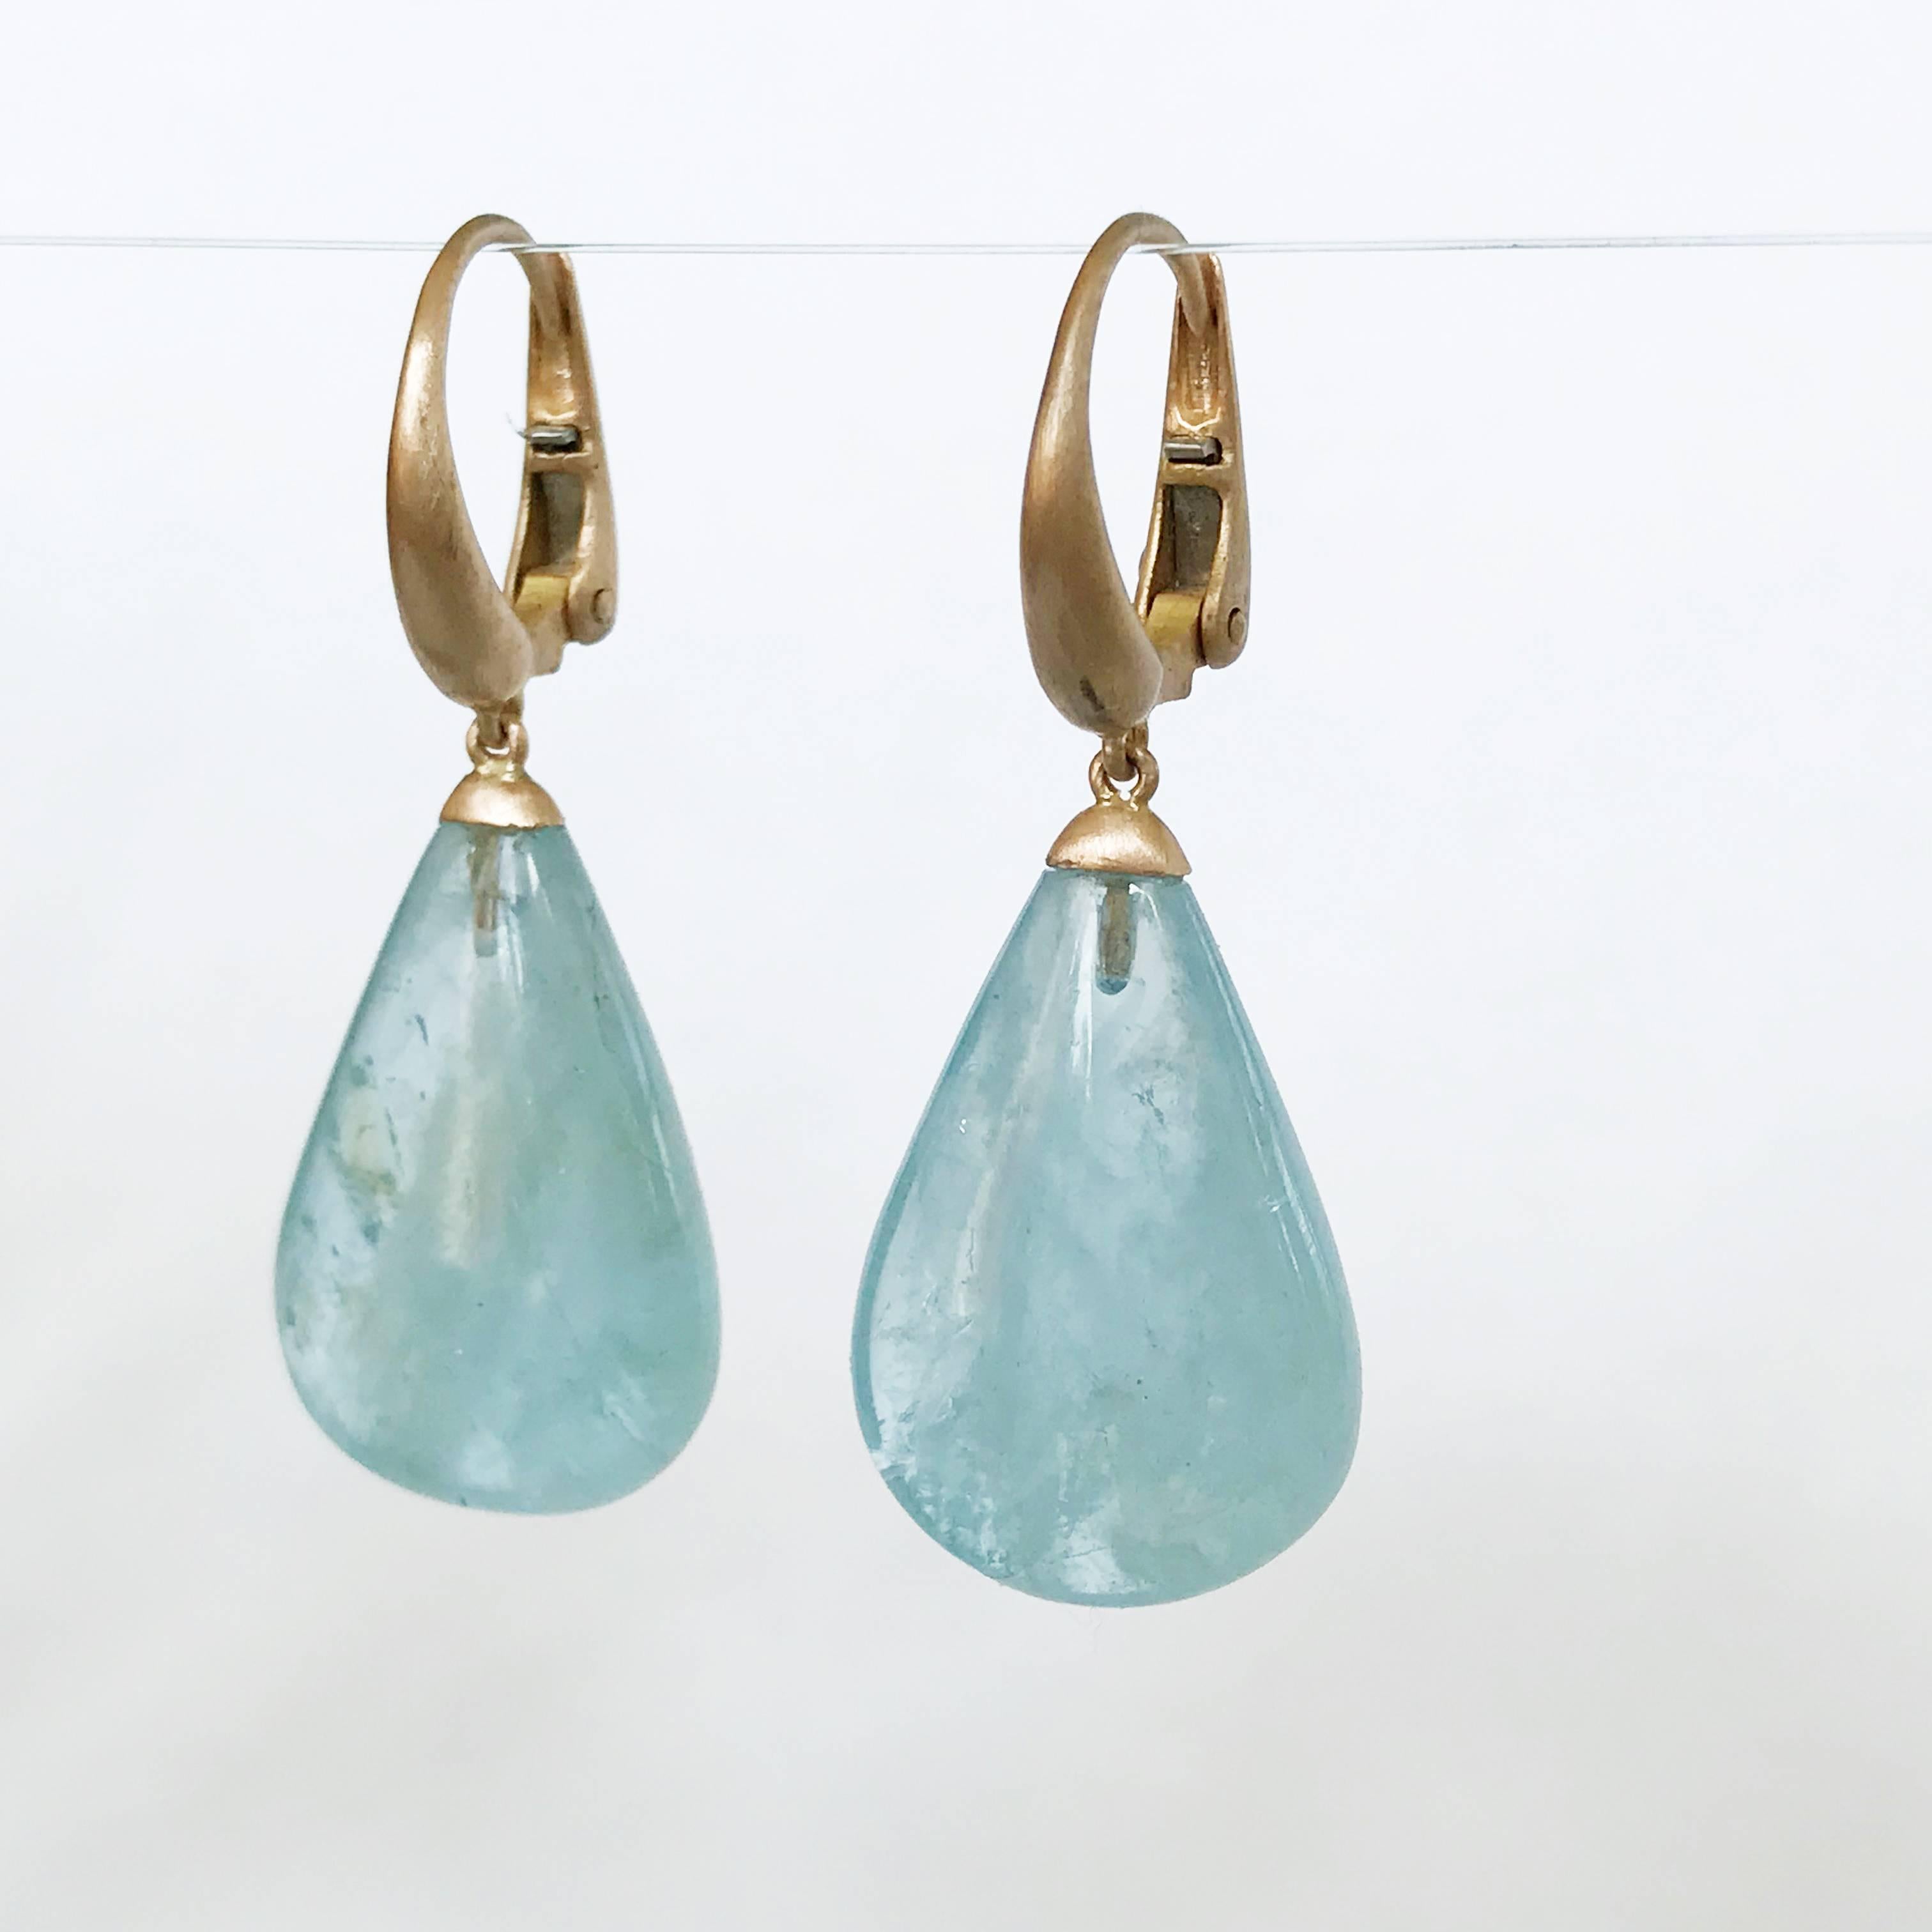 Dalben design 18 kt satin finished rose gold earrings with two drop shape Aquamarine 15 x 22 mm weight 30,5 carat . 
Earring dimension : 
width 15 mm 
height with leverback 38 mm 
The earrings has been designed and handcrafted in our atelier in Como